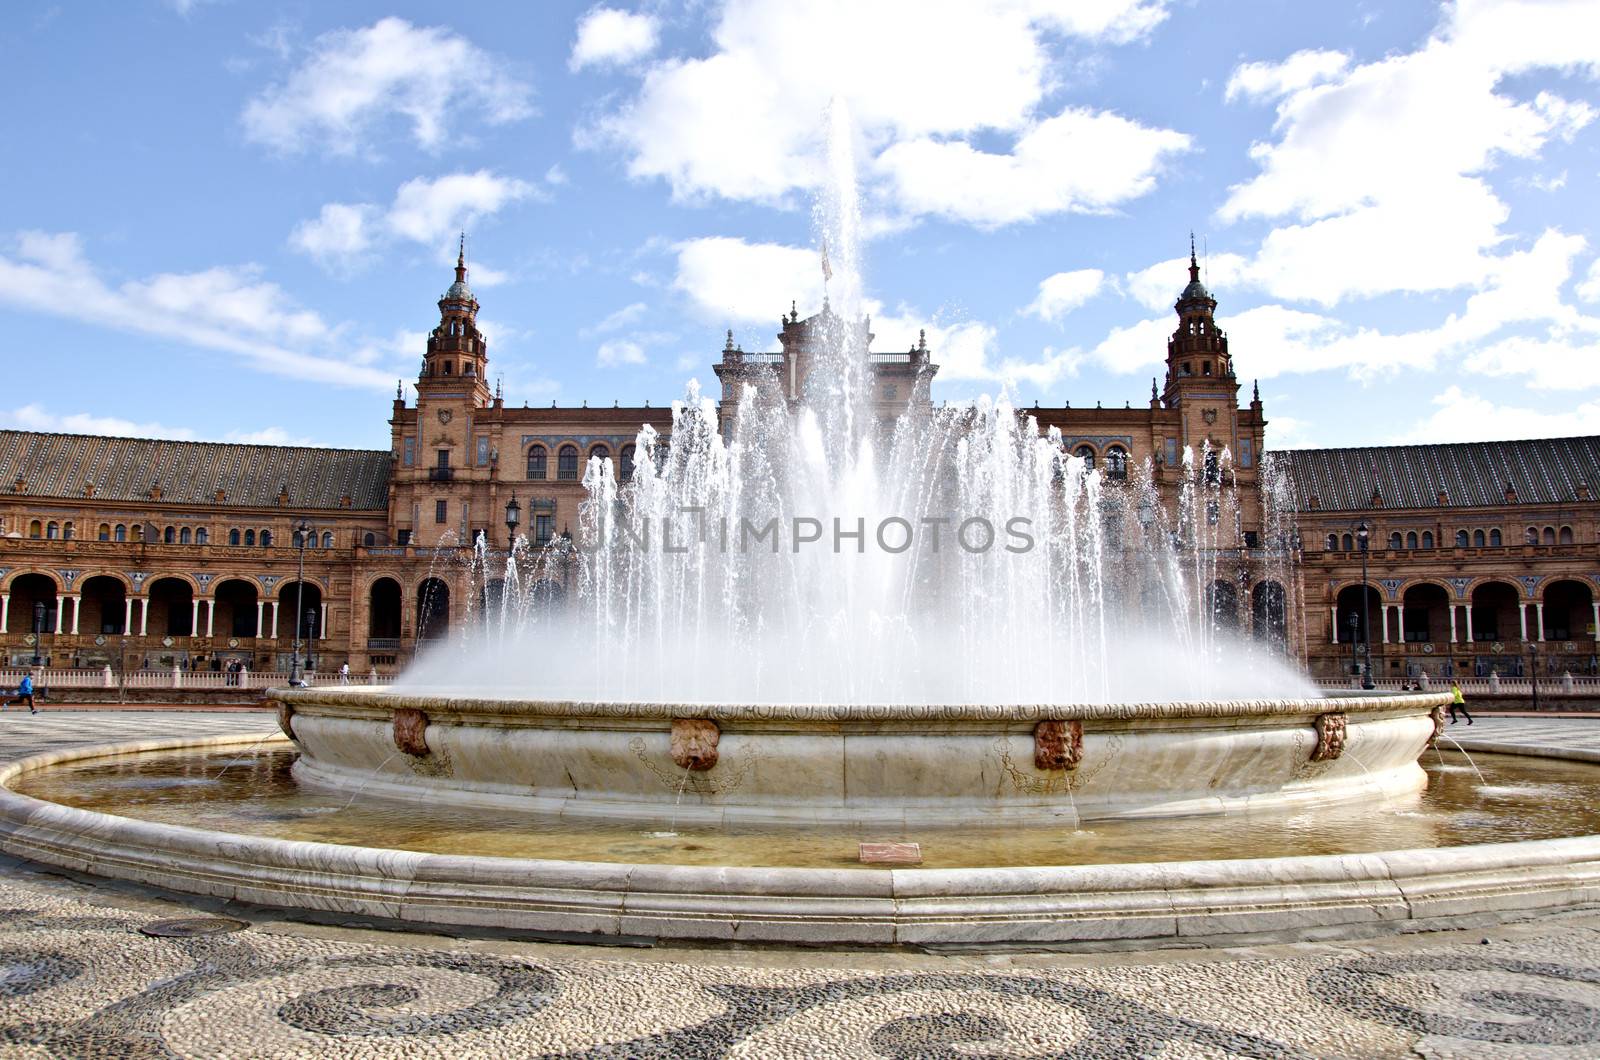 Plaza of Spain, Seville by lauria